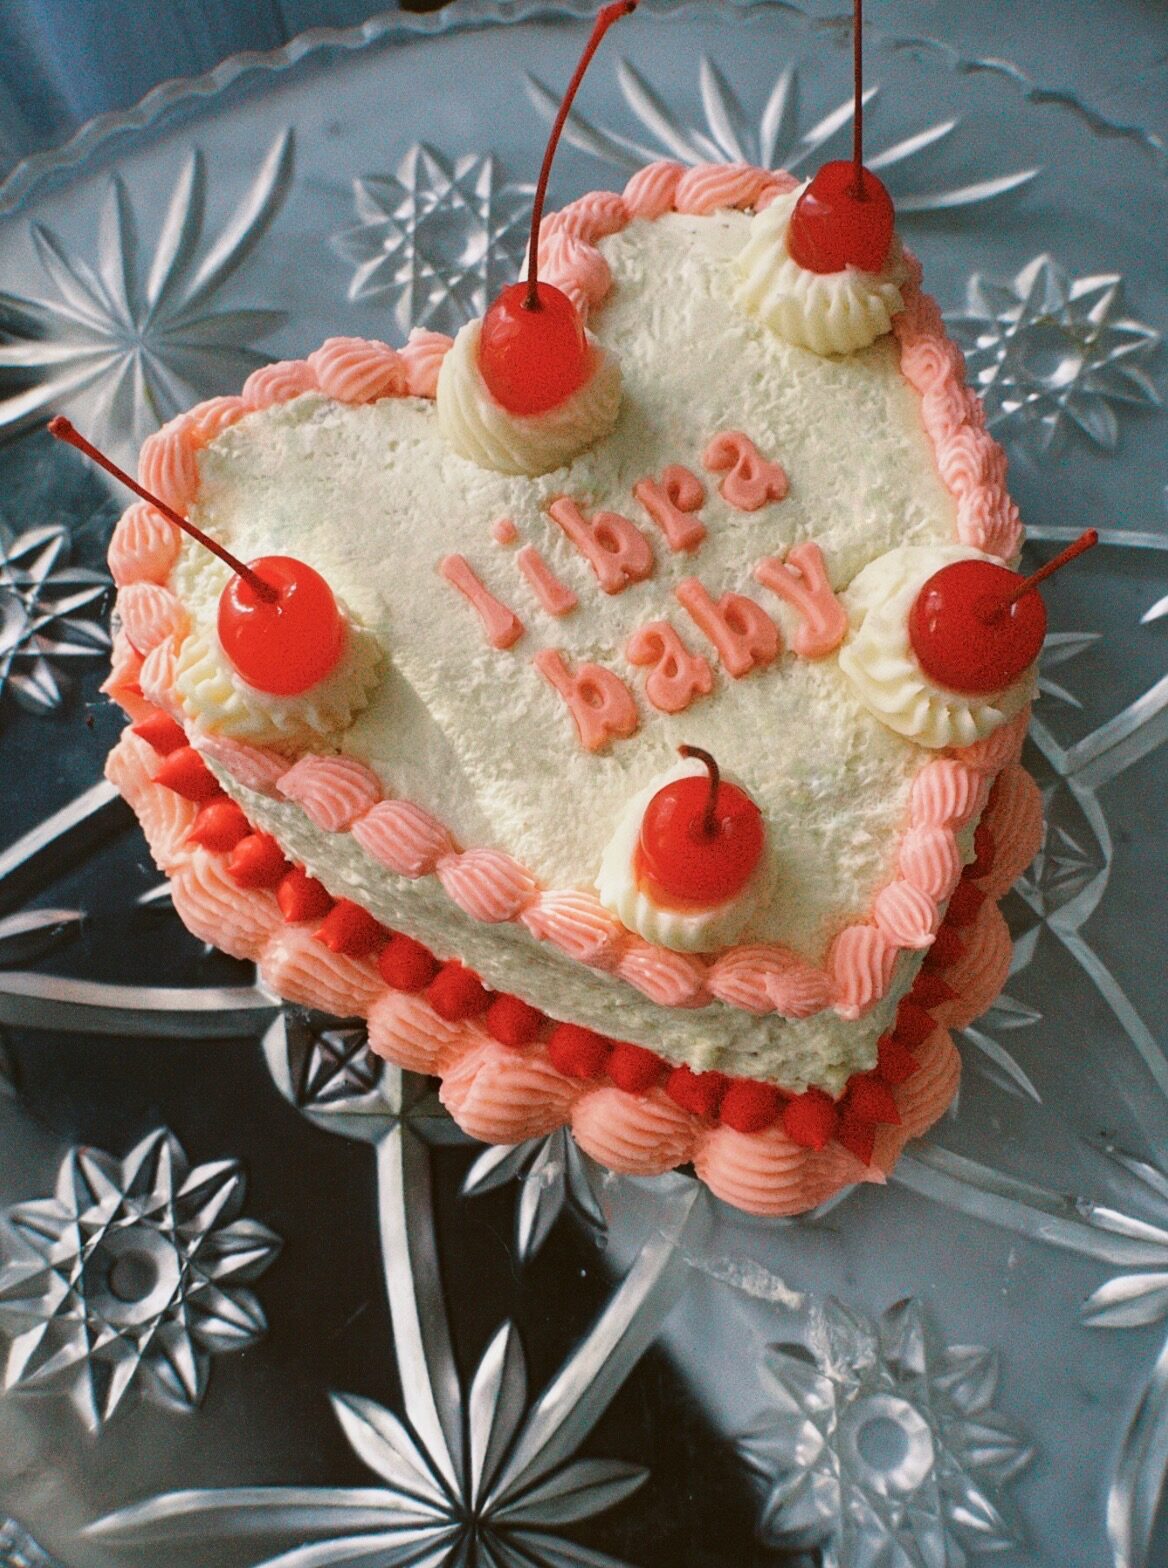 Vintage Heart Cake with Cherries